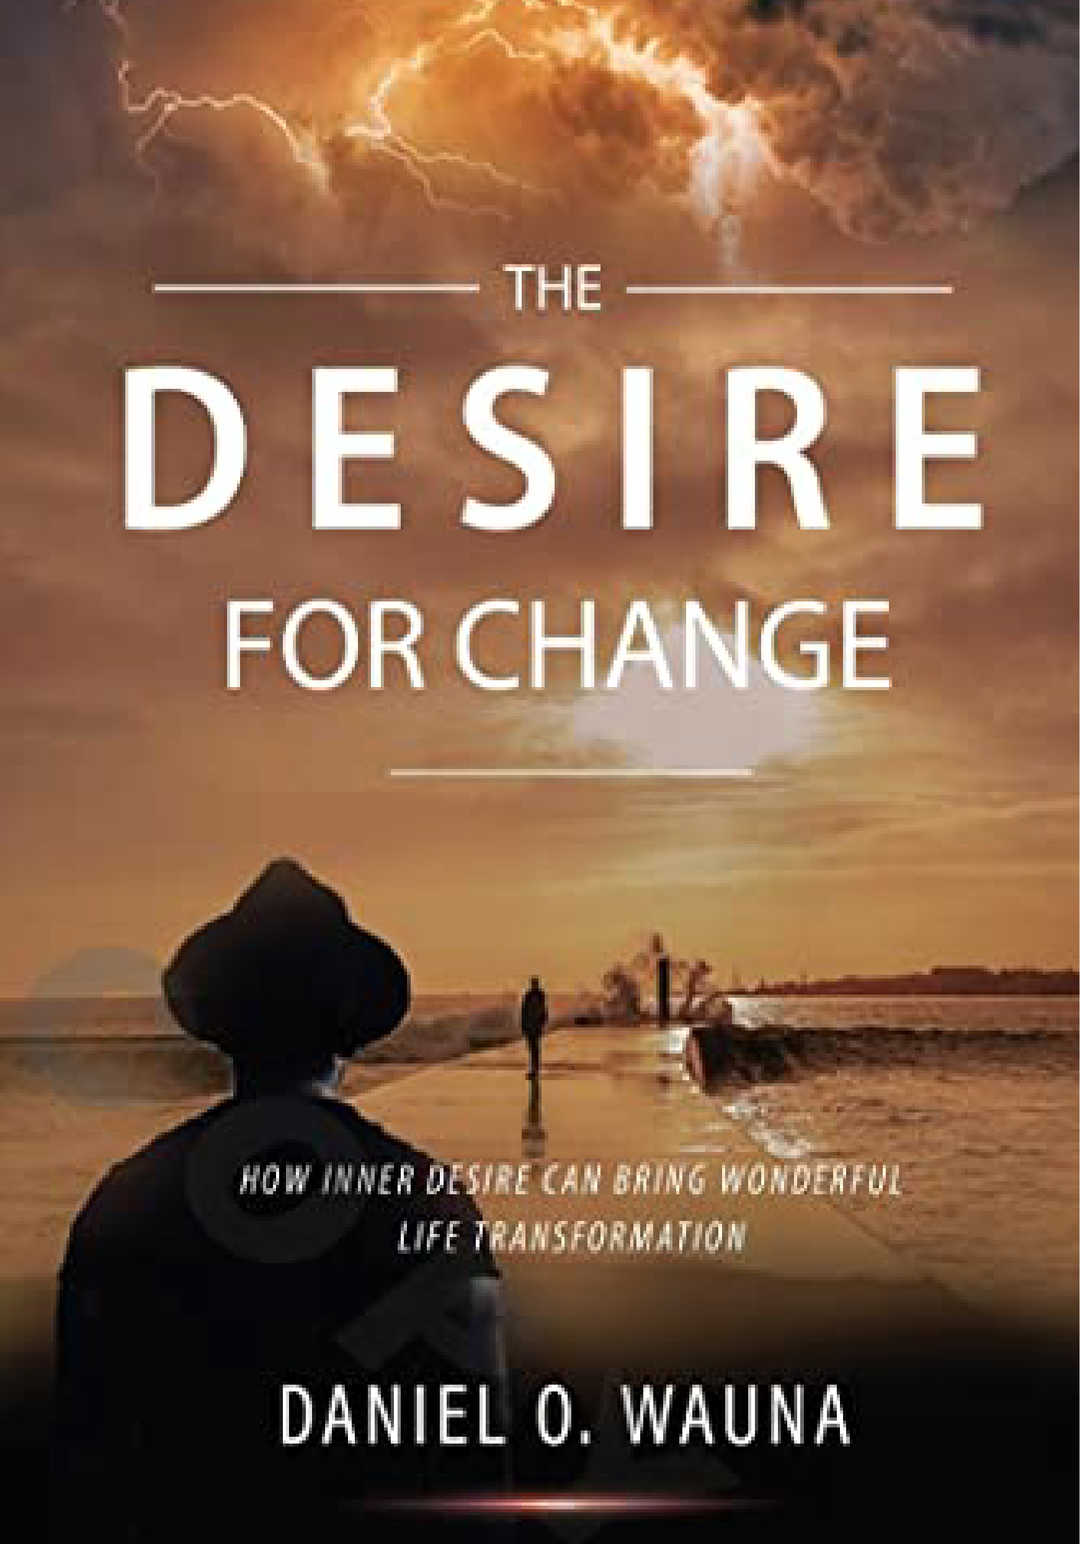 Desire For Change: How Inner Desire Can Bring Wonderful Life Transformation